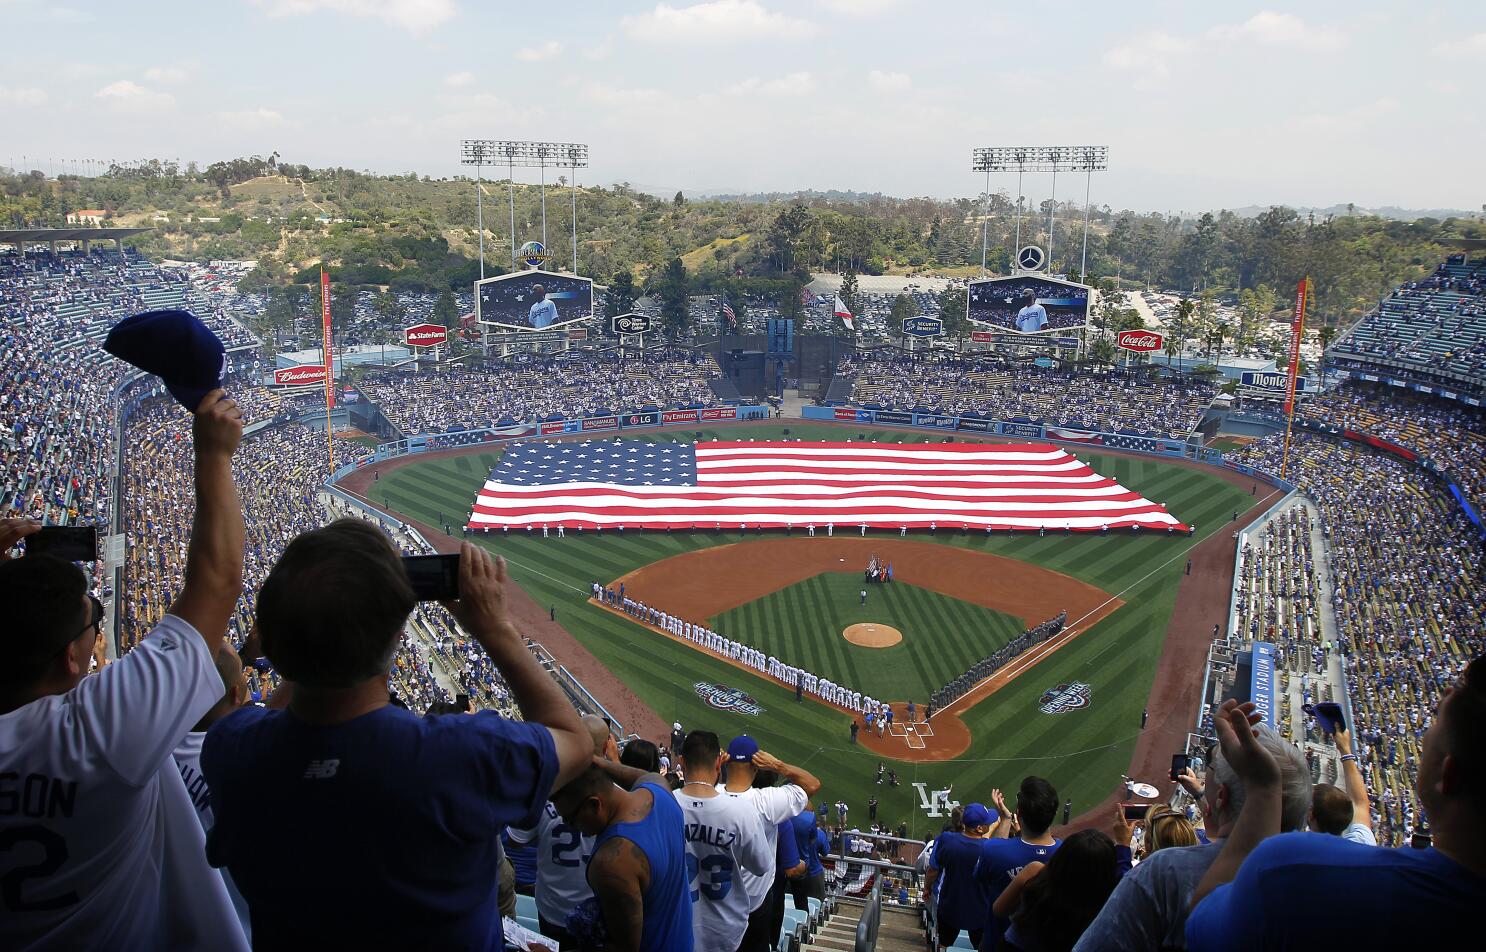 Los Angeles Dodgers 2020 Schedule To Be Unveiled Monday During MLB Network  Special